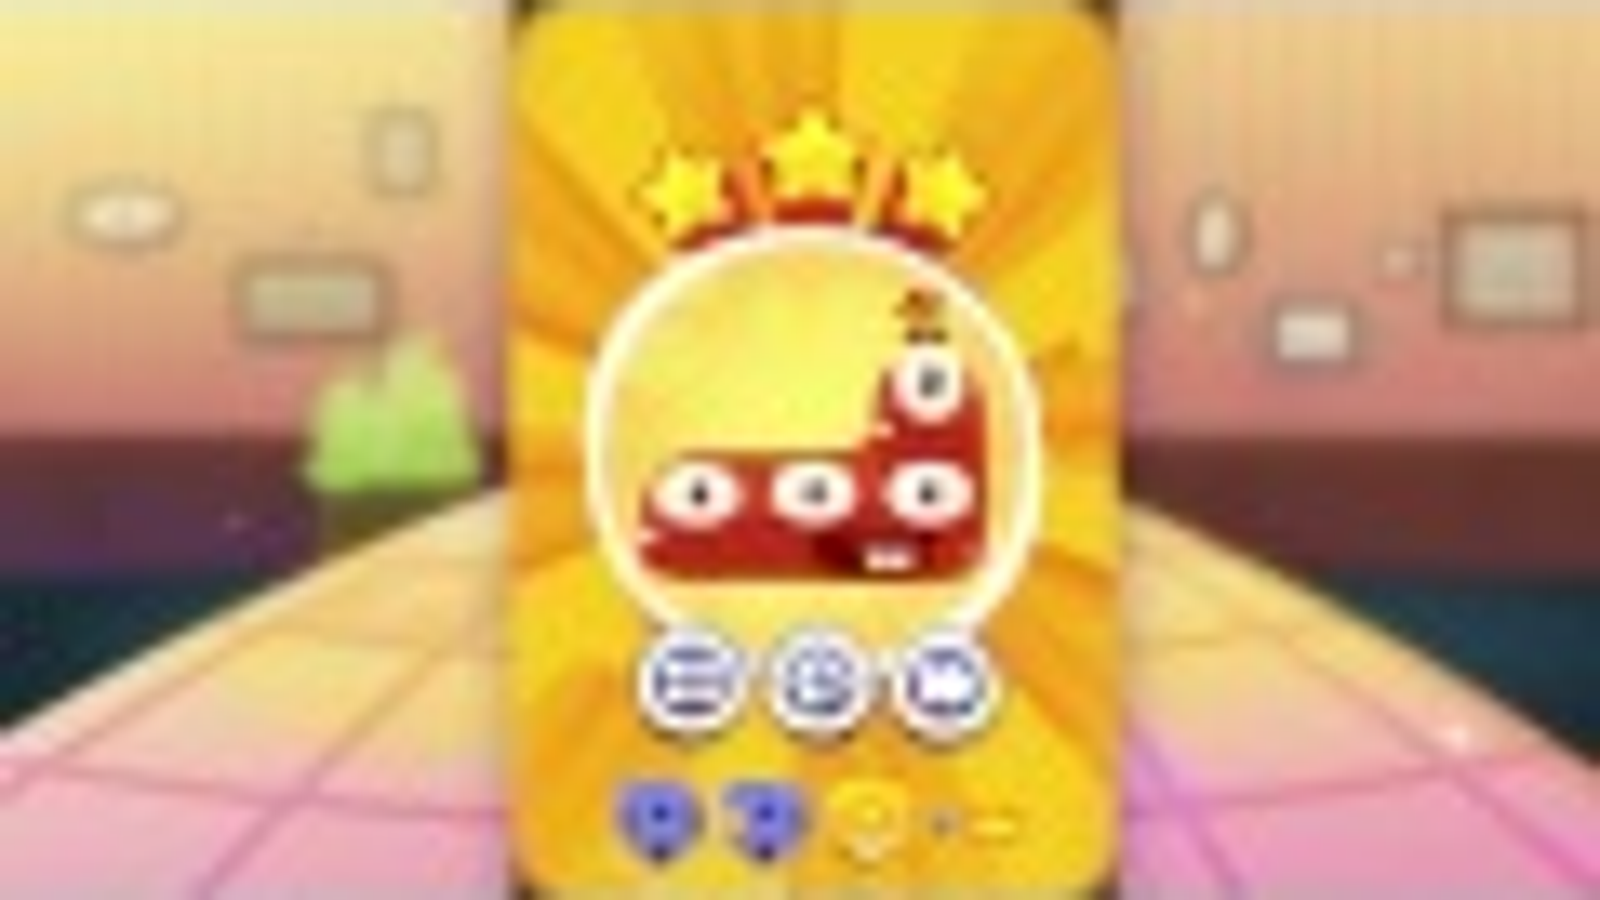 download cut the rope 2 boo